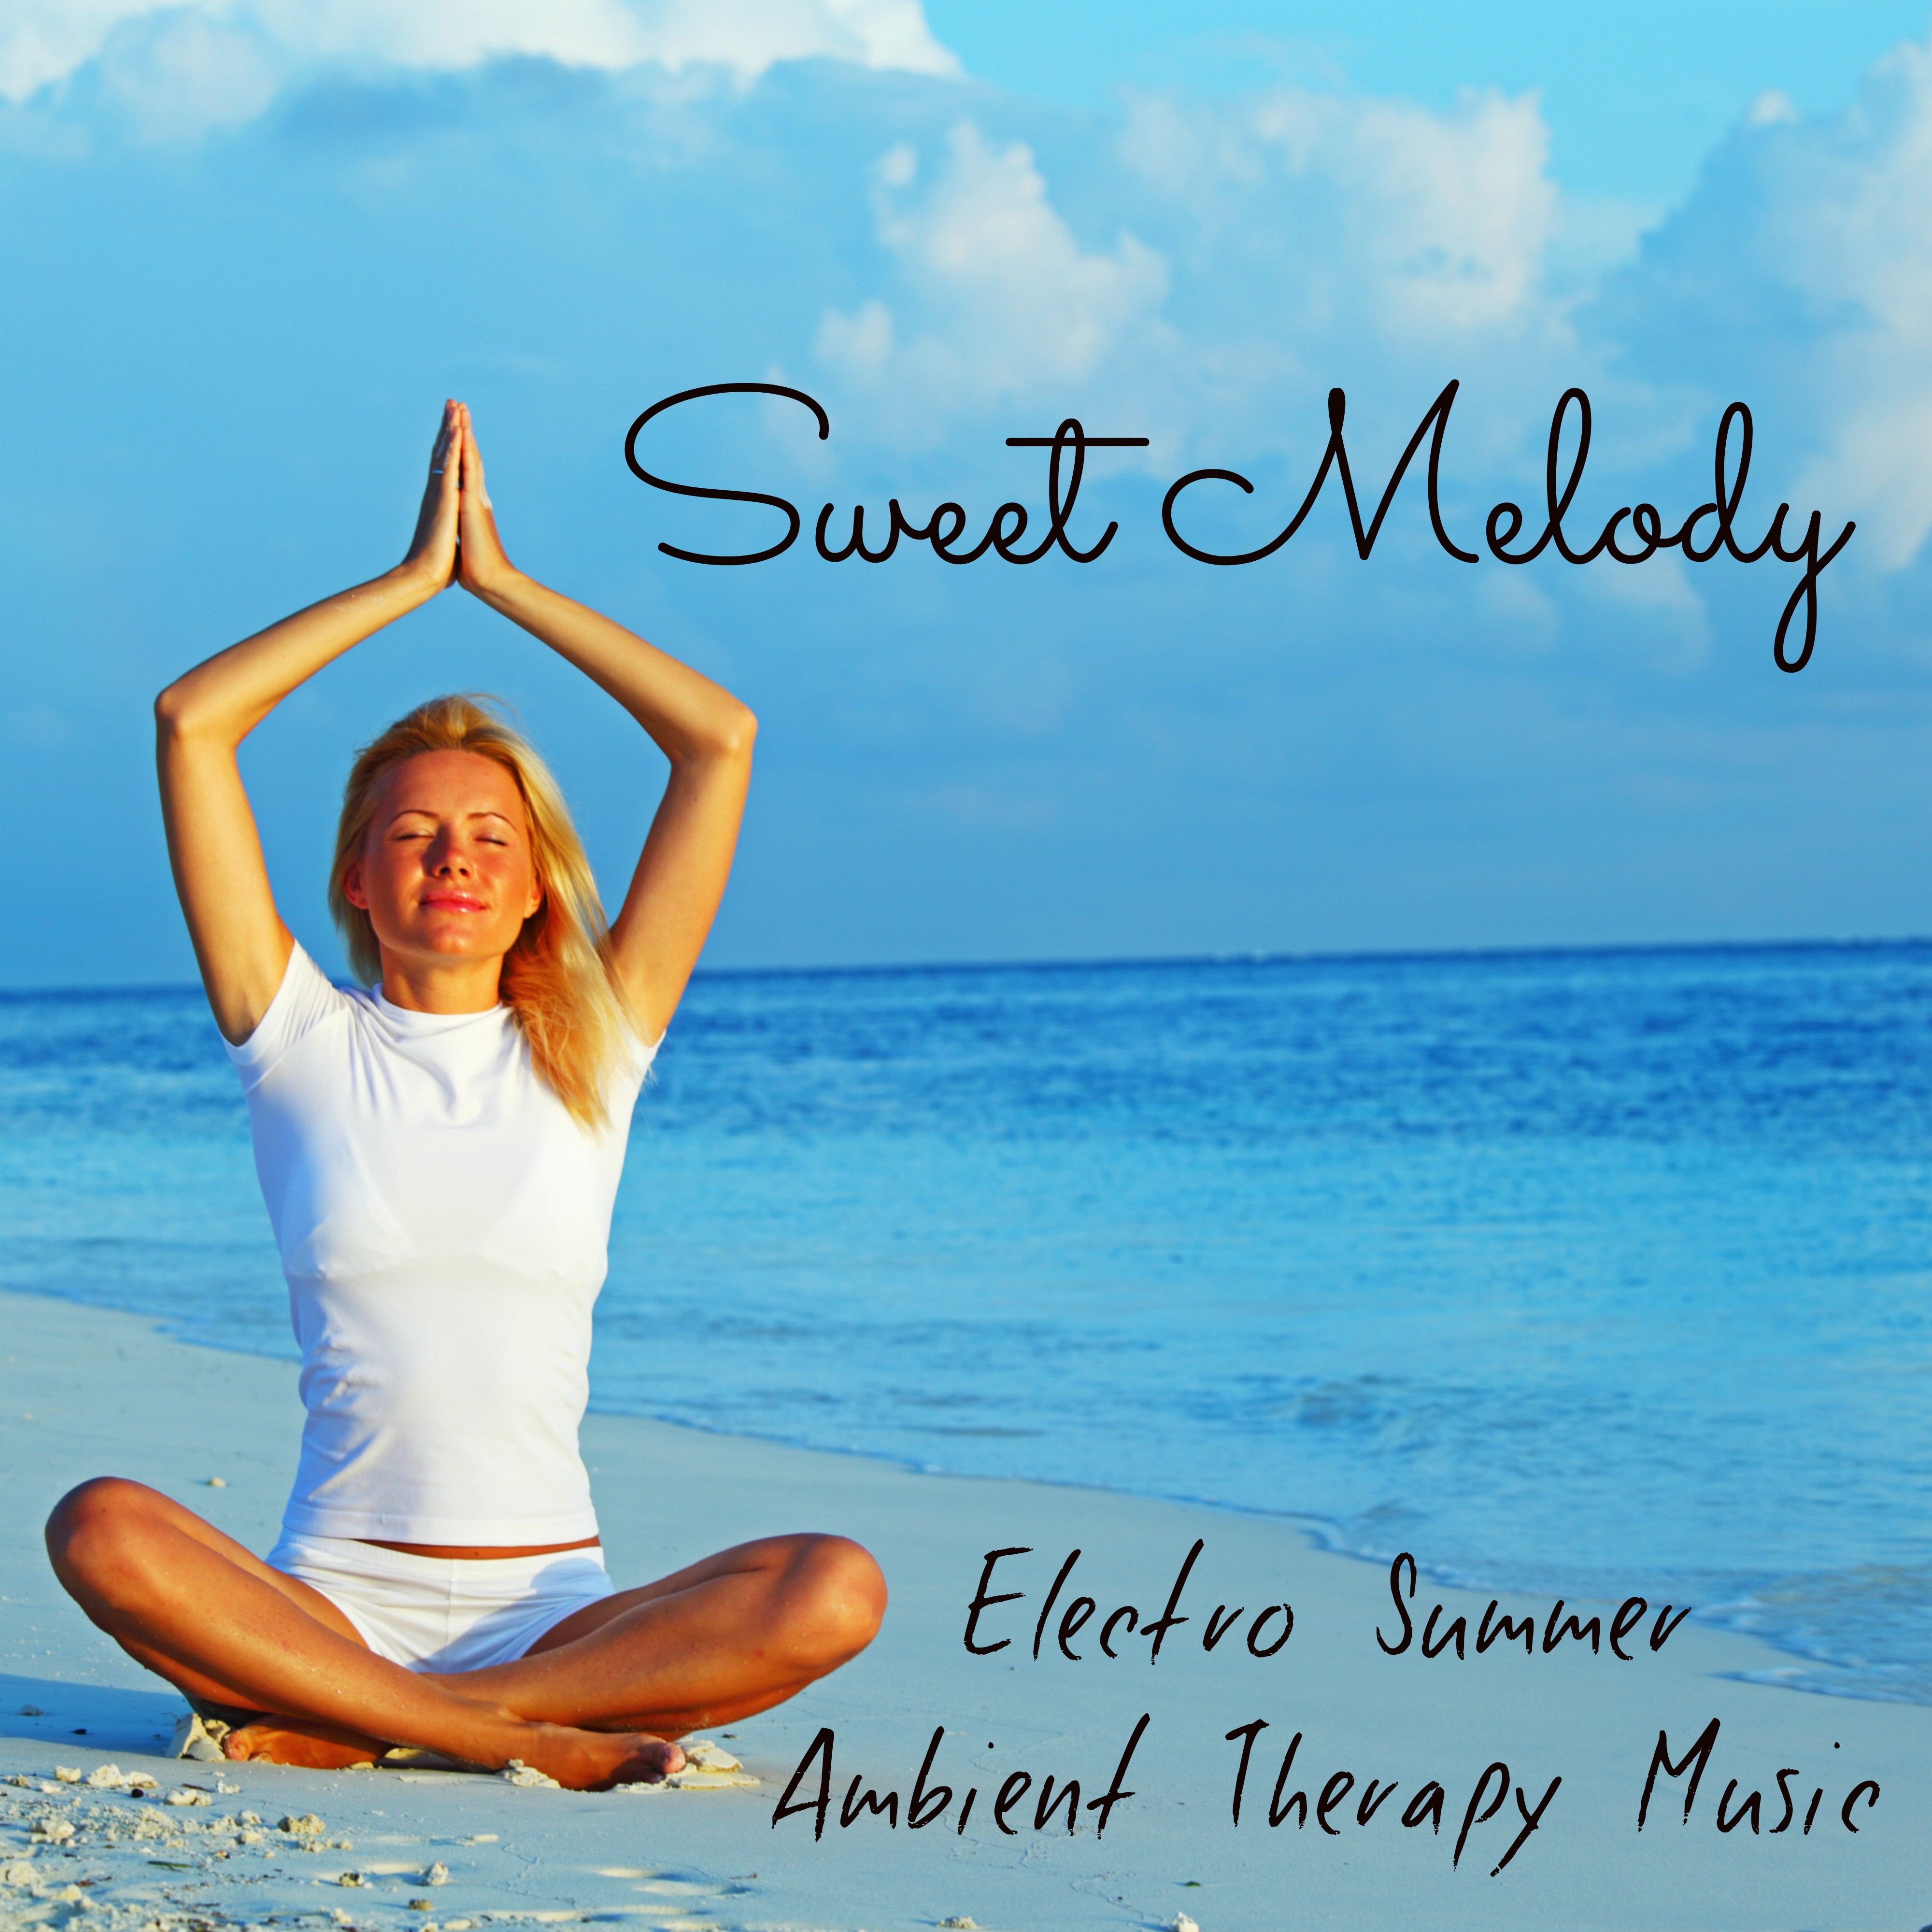 Sweet Melody - Electro Summer Ambient Therapy Music with Instrumental Nature Easy Fitness Sounds